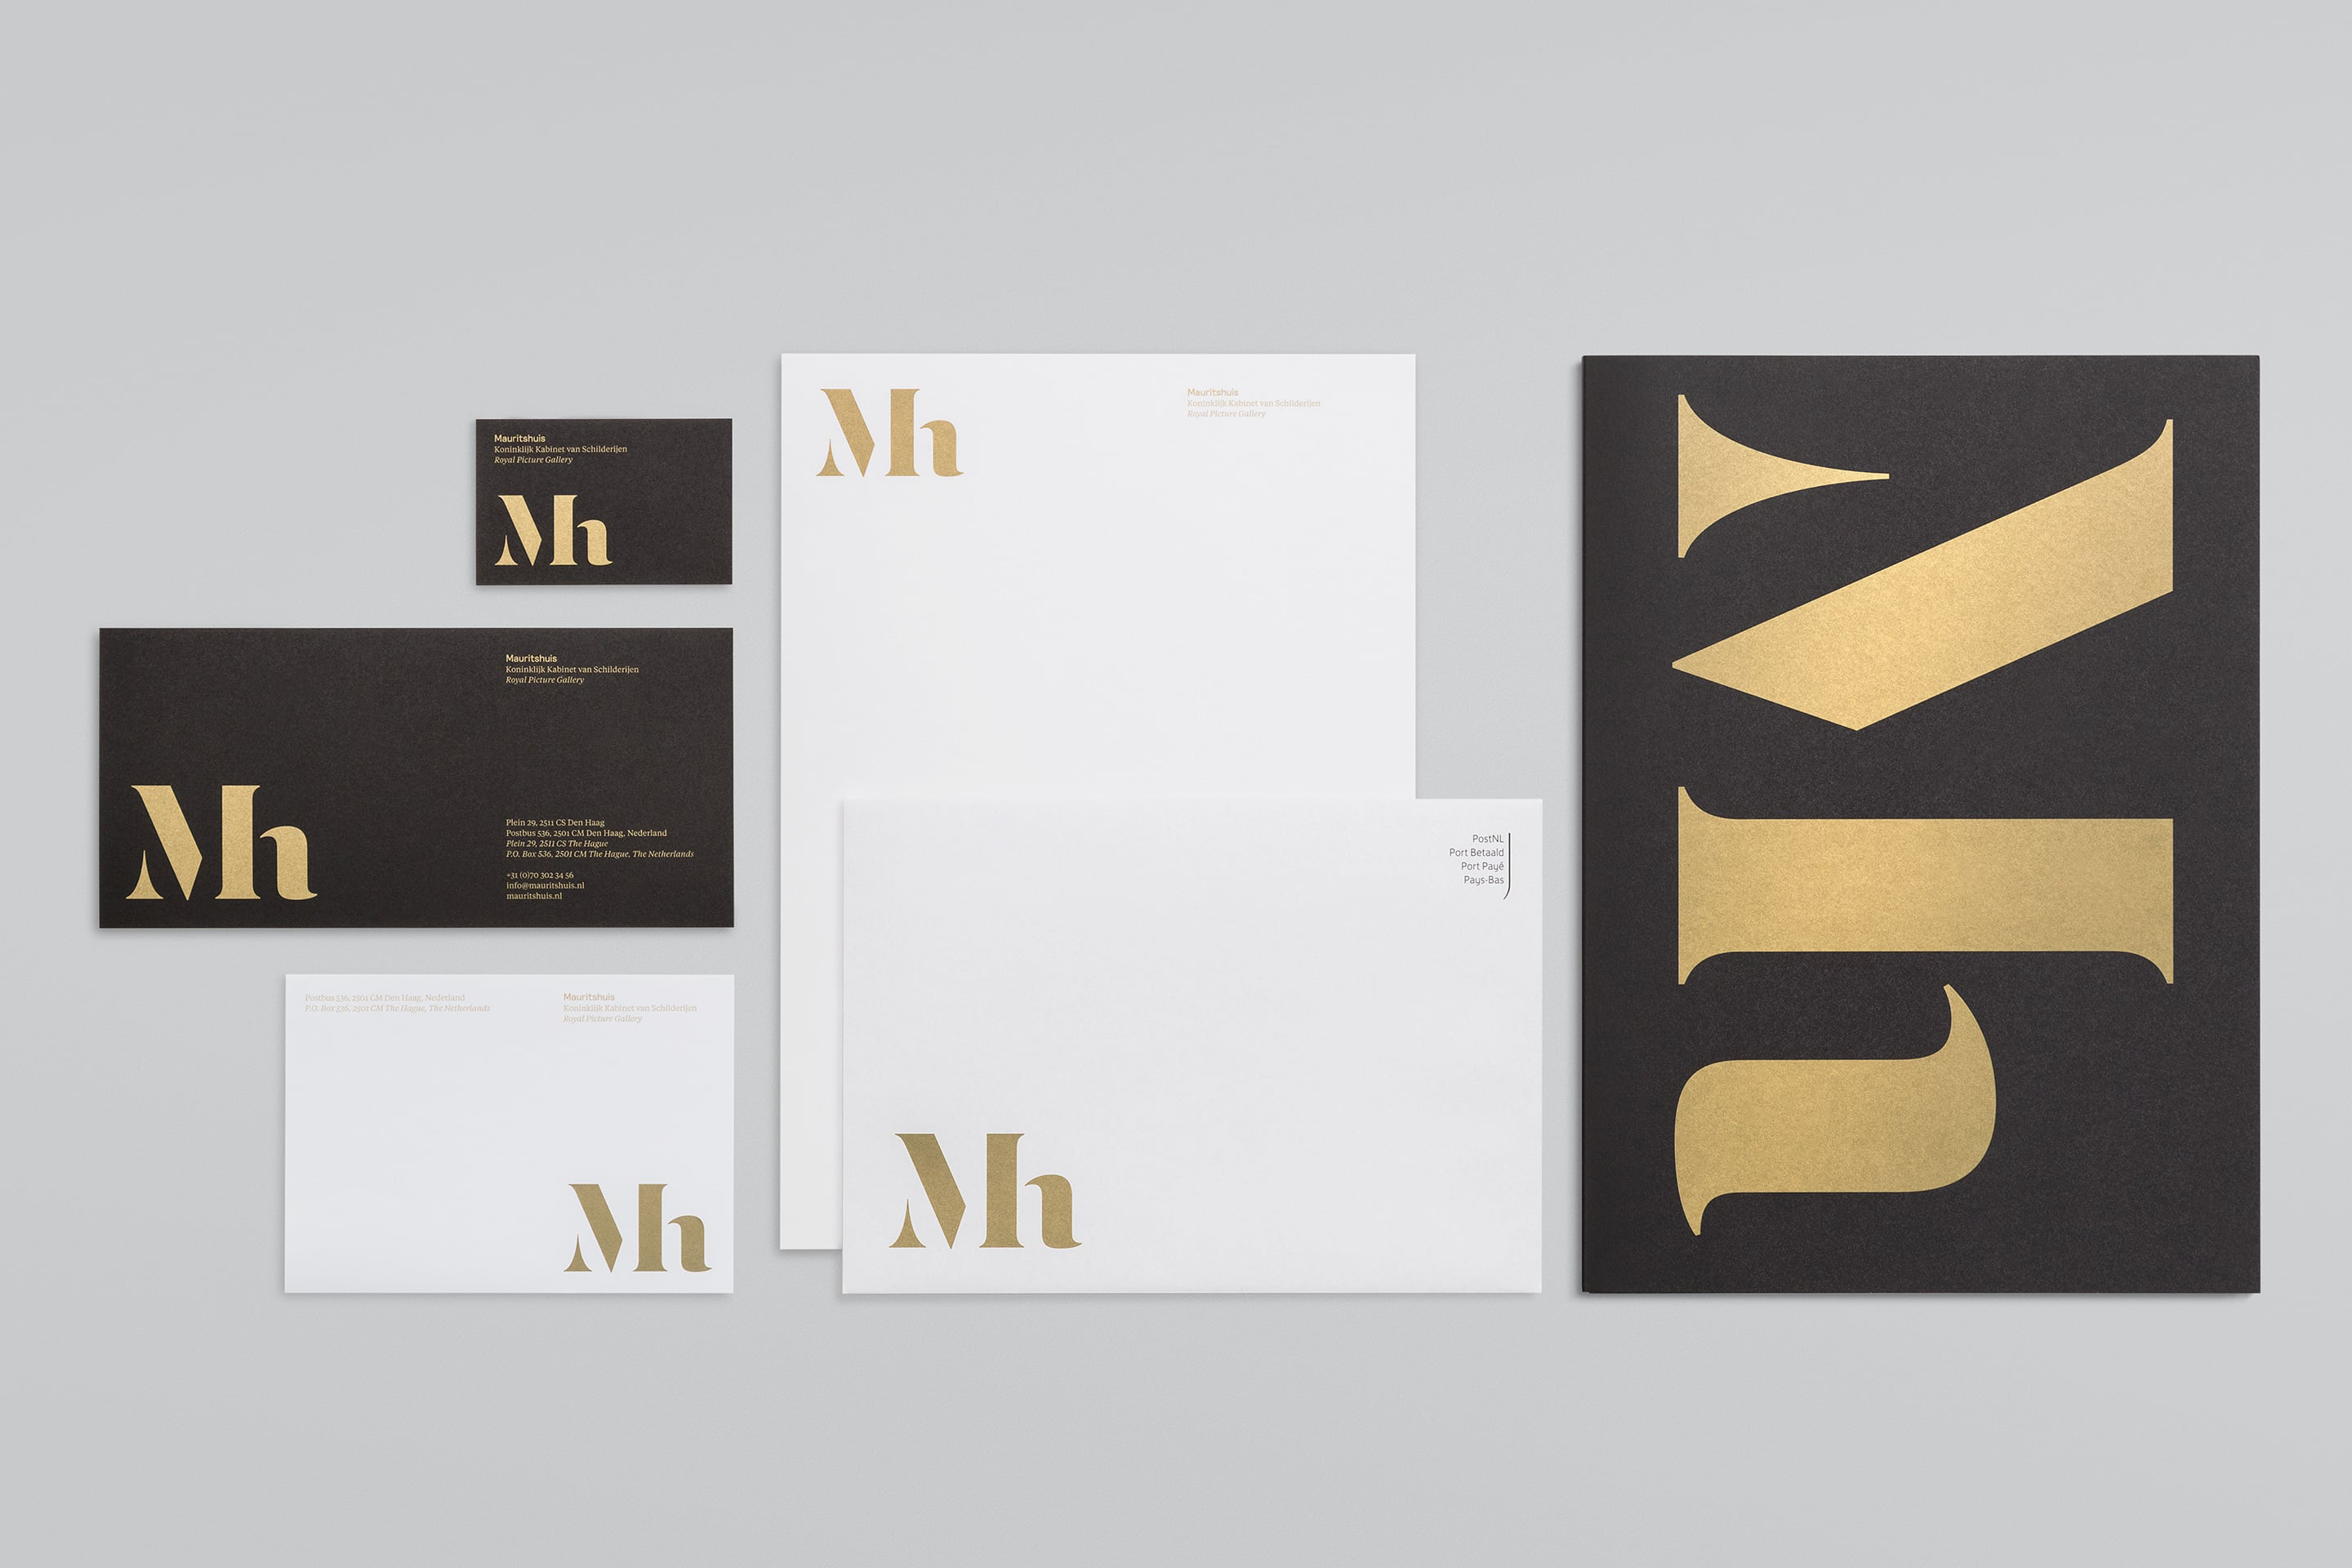 Visual identity, business card, letterhead and compliment slip designed by Dumbar for art museum Mauritshuis